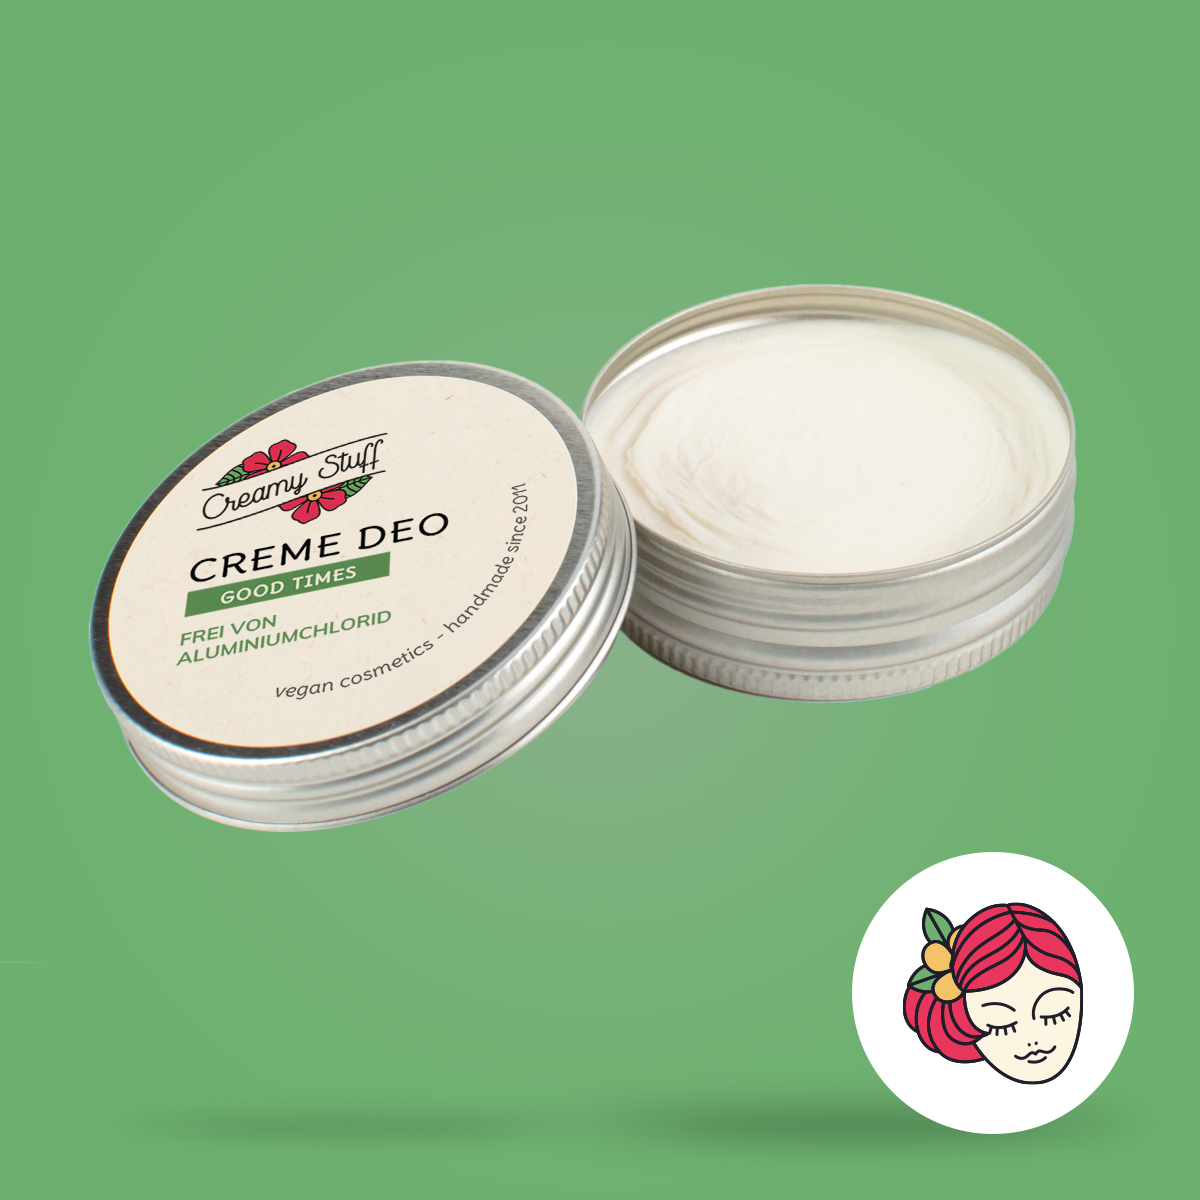 Creme Deo Good Times -Limited!